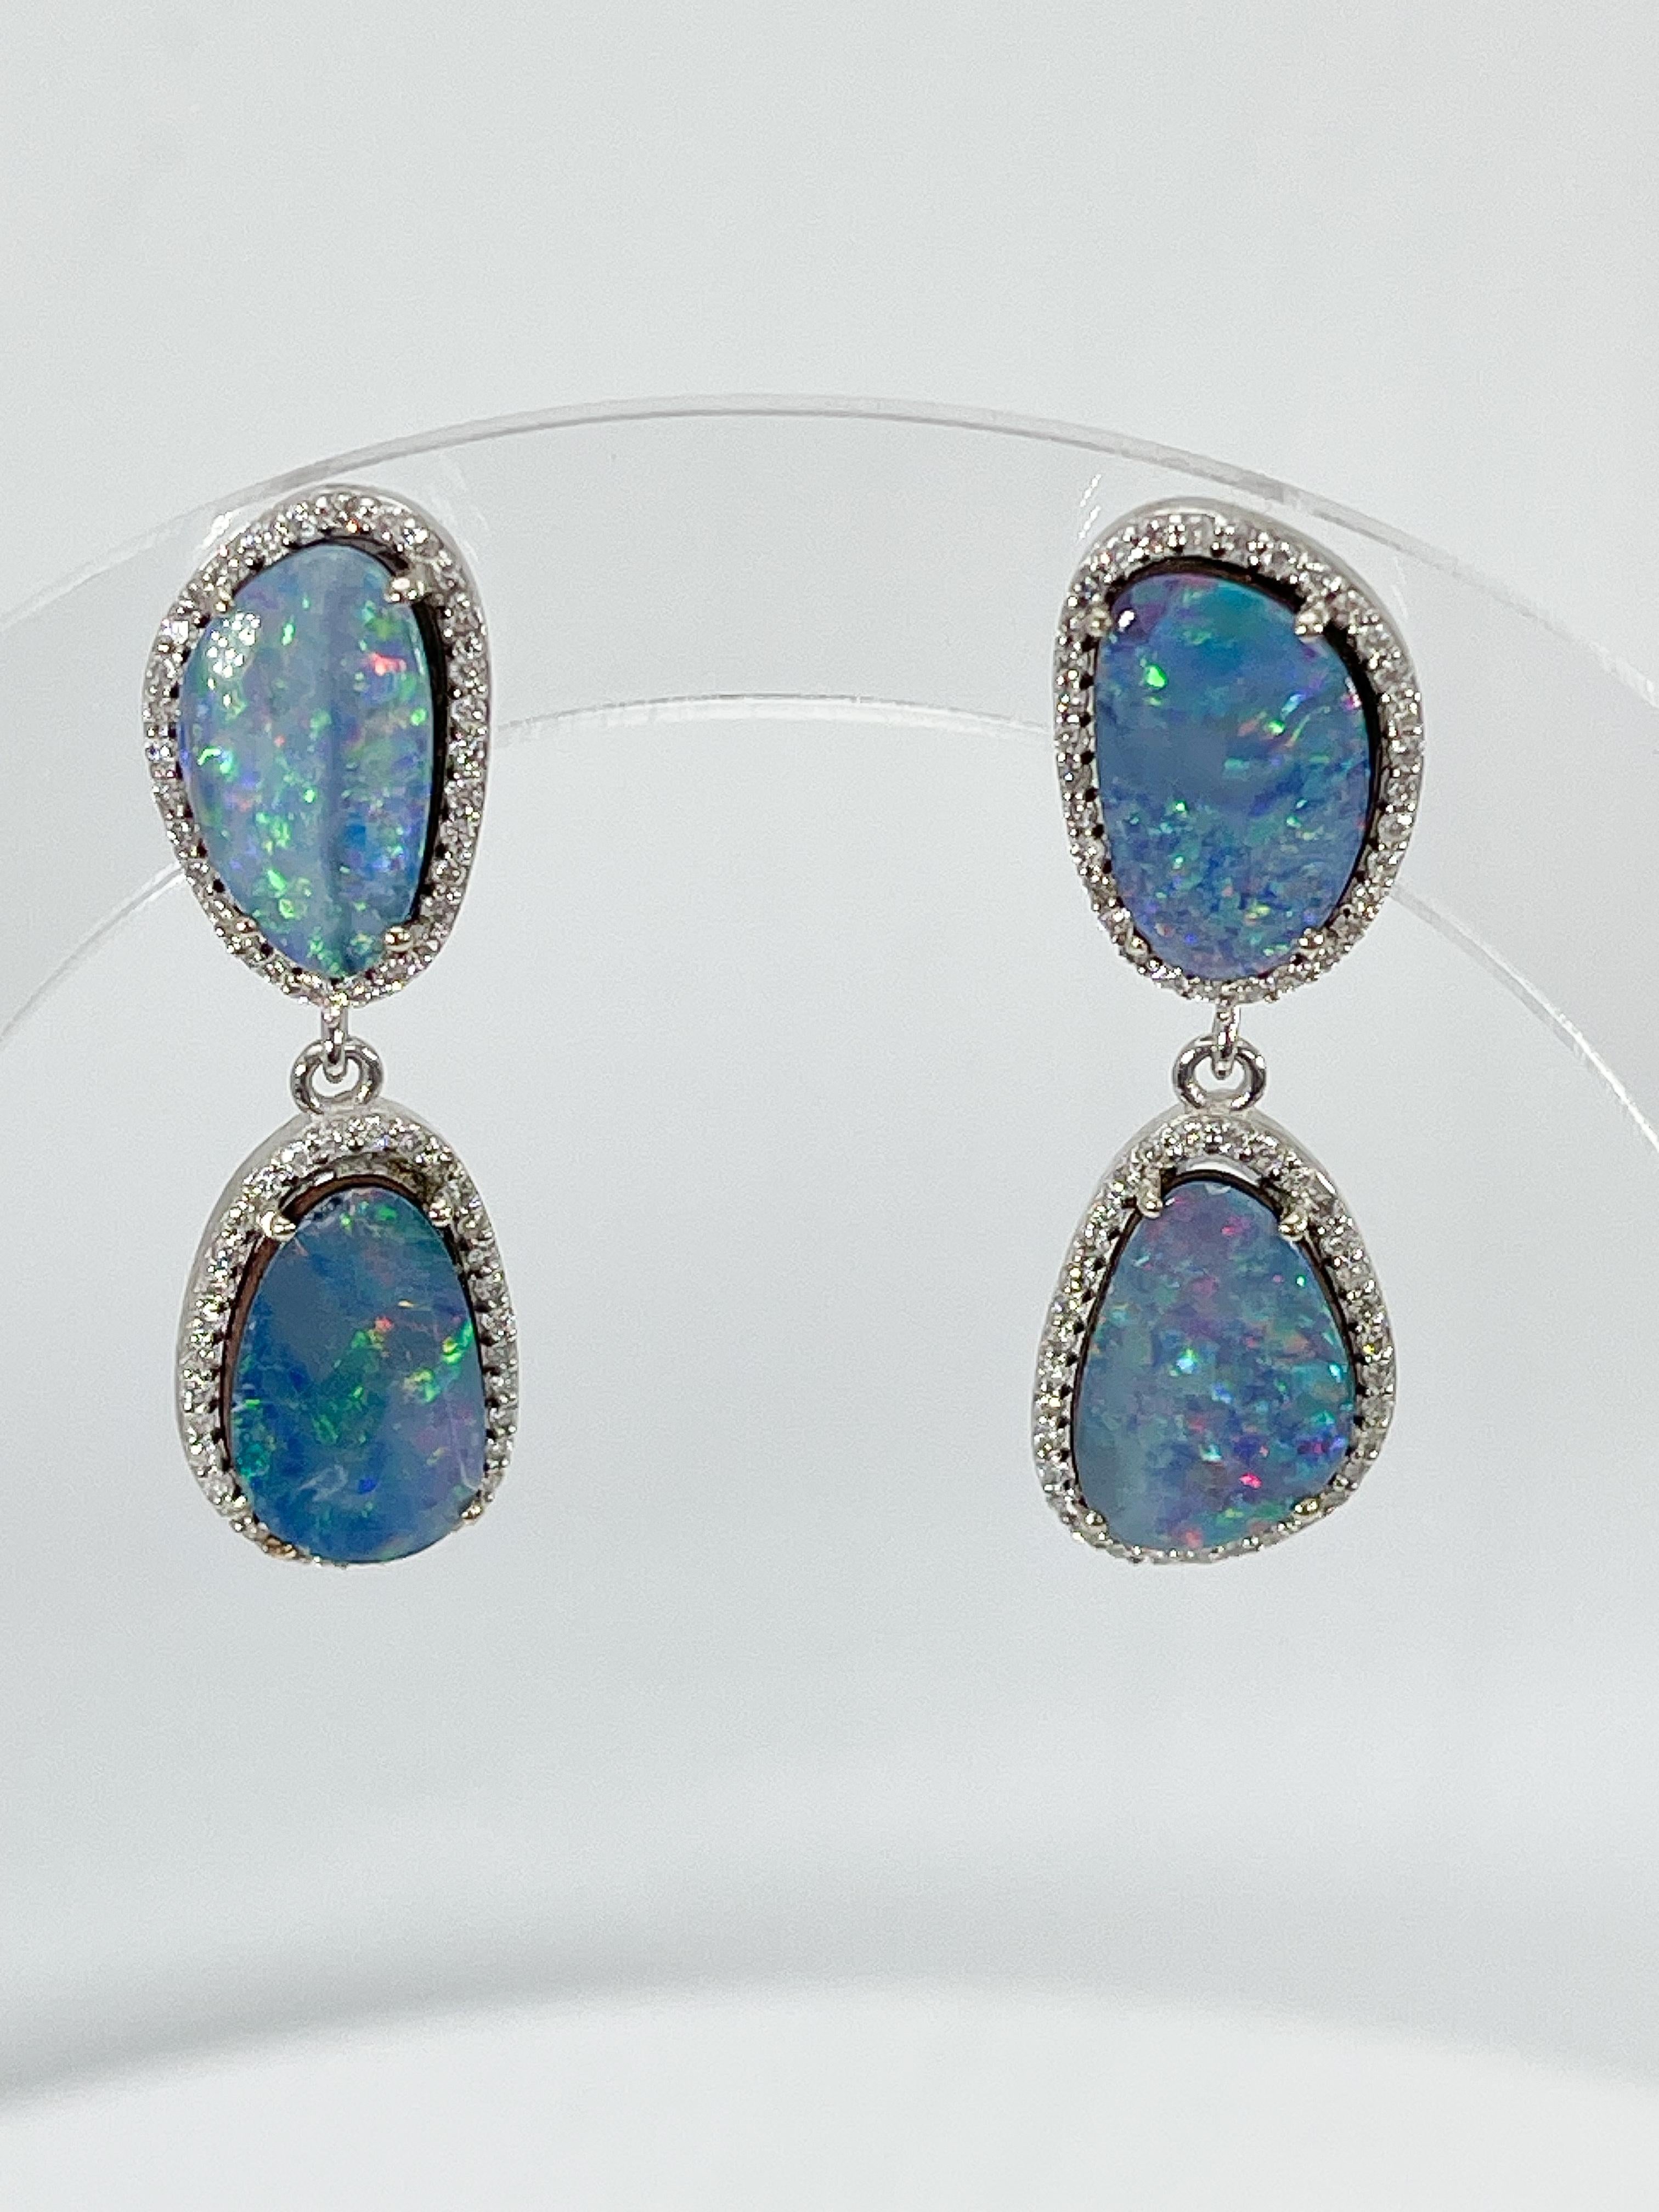 14k white gold Australian opal and .65 CTW diamond earrings. The diamonds in these earrings are all round, the measurements are 35 x 11 mm, and they have a total weight of 6.82 grams.